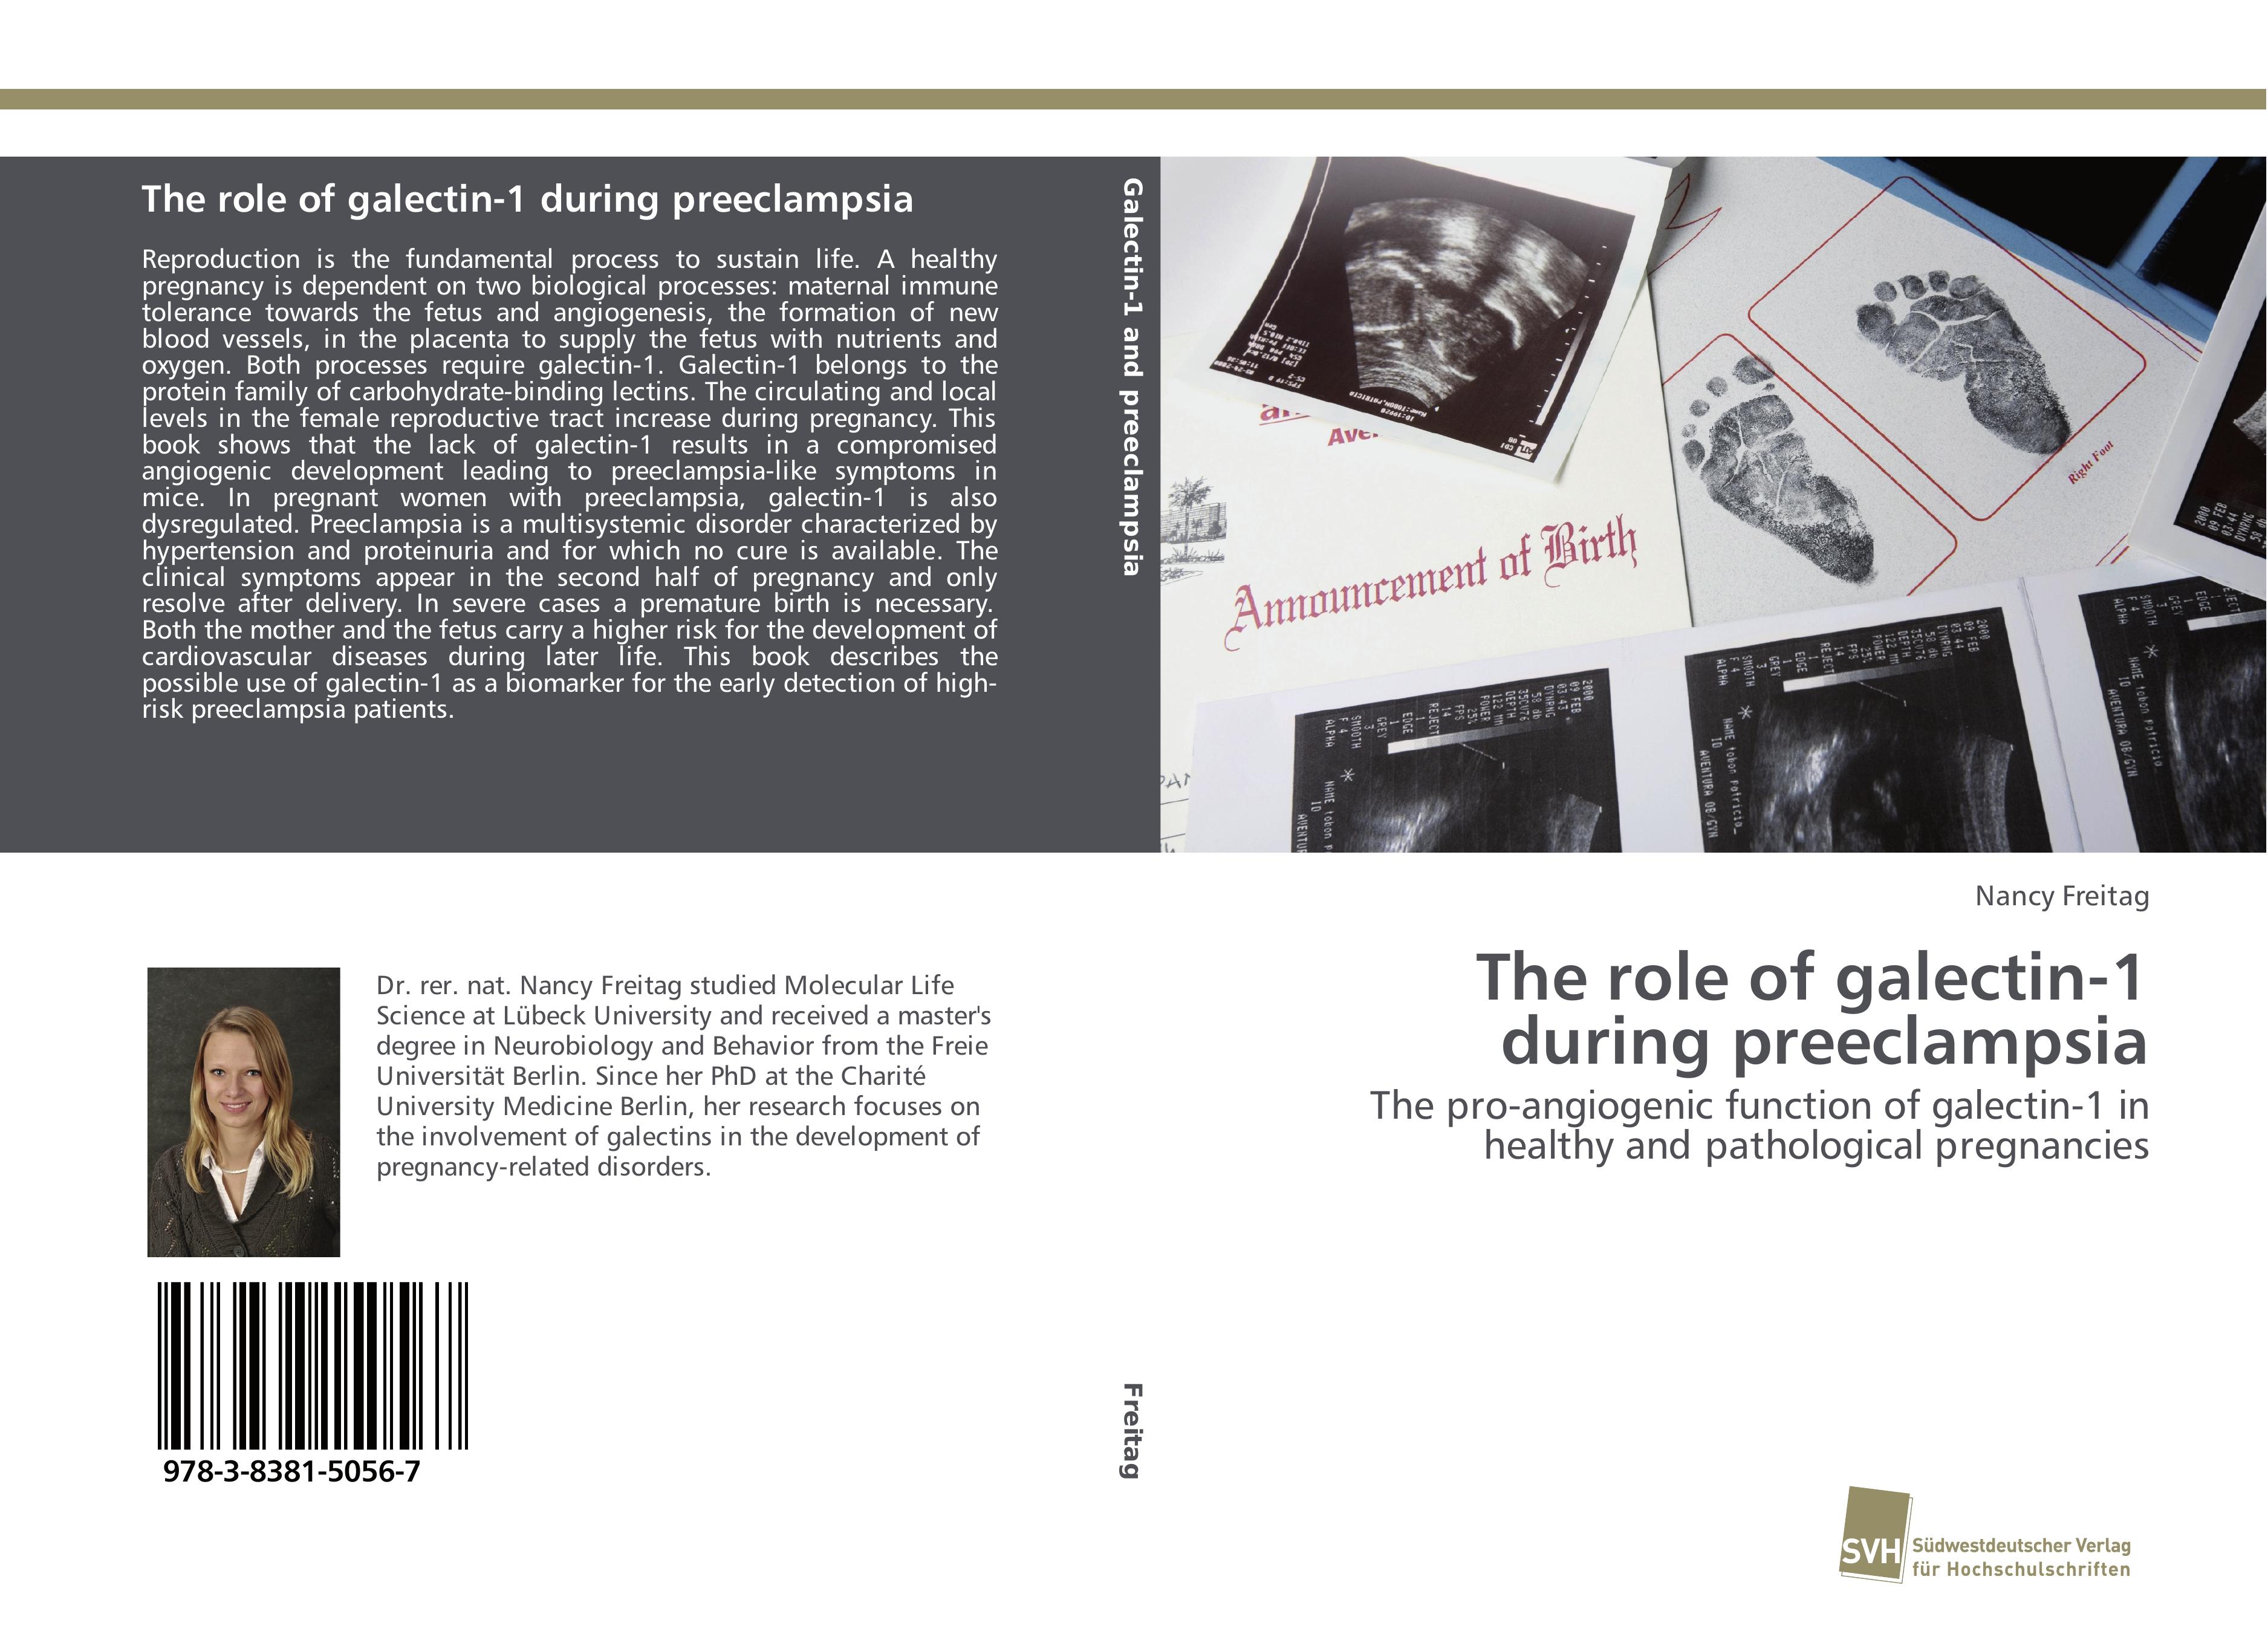 The role of galectin-1 during preeclampsia | The pro-angiogenic function of galectin-1 in healthy and pathological pregnancies | Nancy Freitag | Taschenbuch | Paperback | 124 S. | Englisch | 2015 - Freitag, Nancy